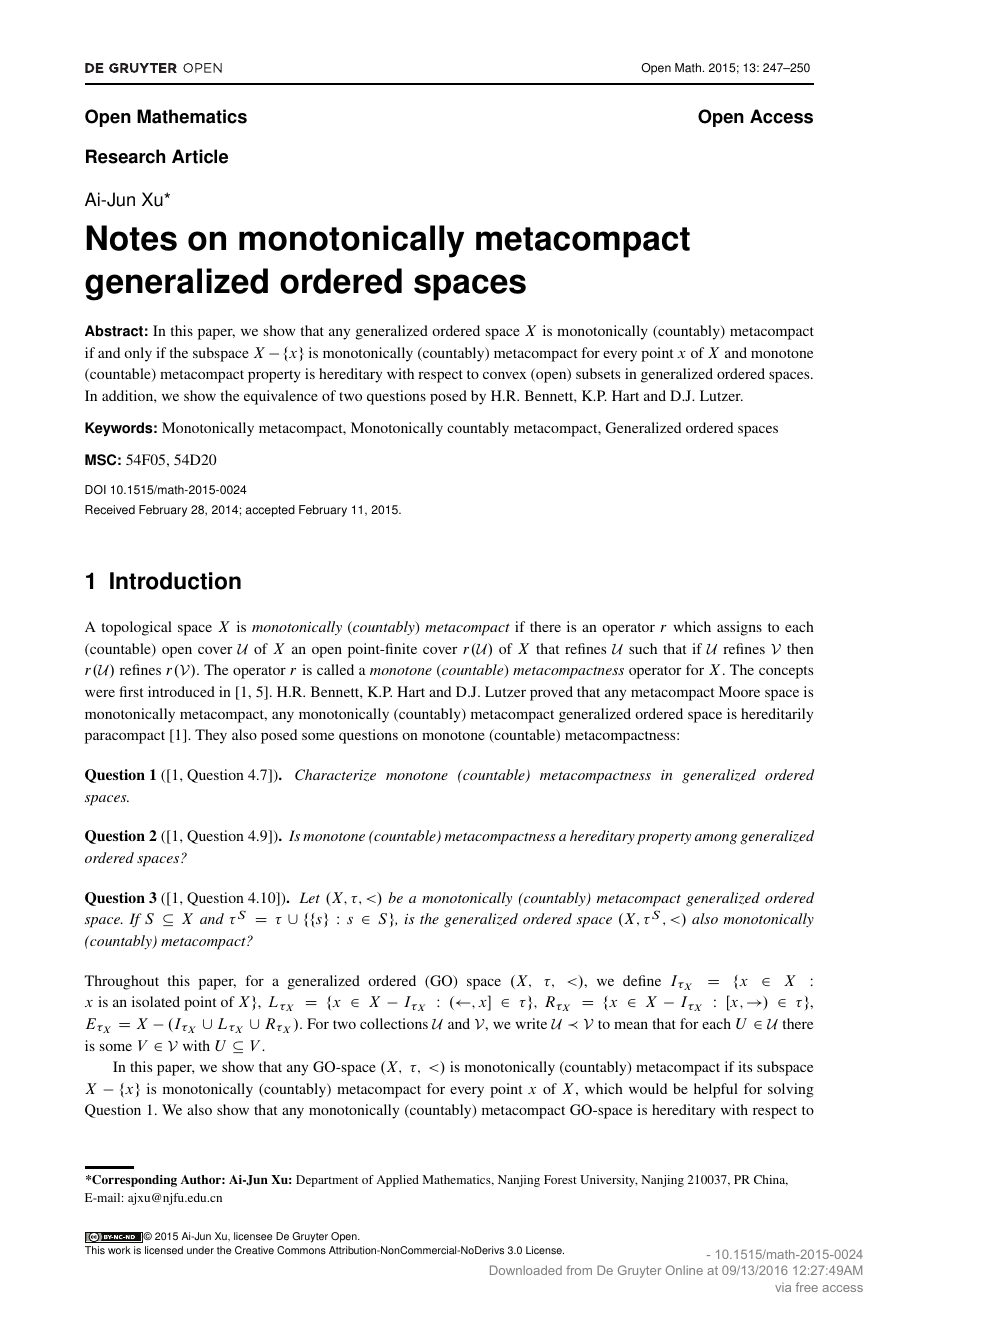 Notes On Monotonically Metacompact Generalized Ordered Spaces Topic Of Research Paper In Mathematics Download Scholarly Article Pdf And Read For Free On Cyberleninka Open Science Hub